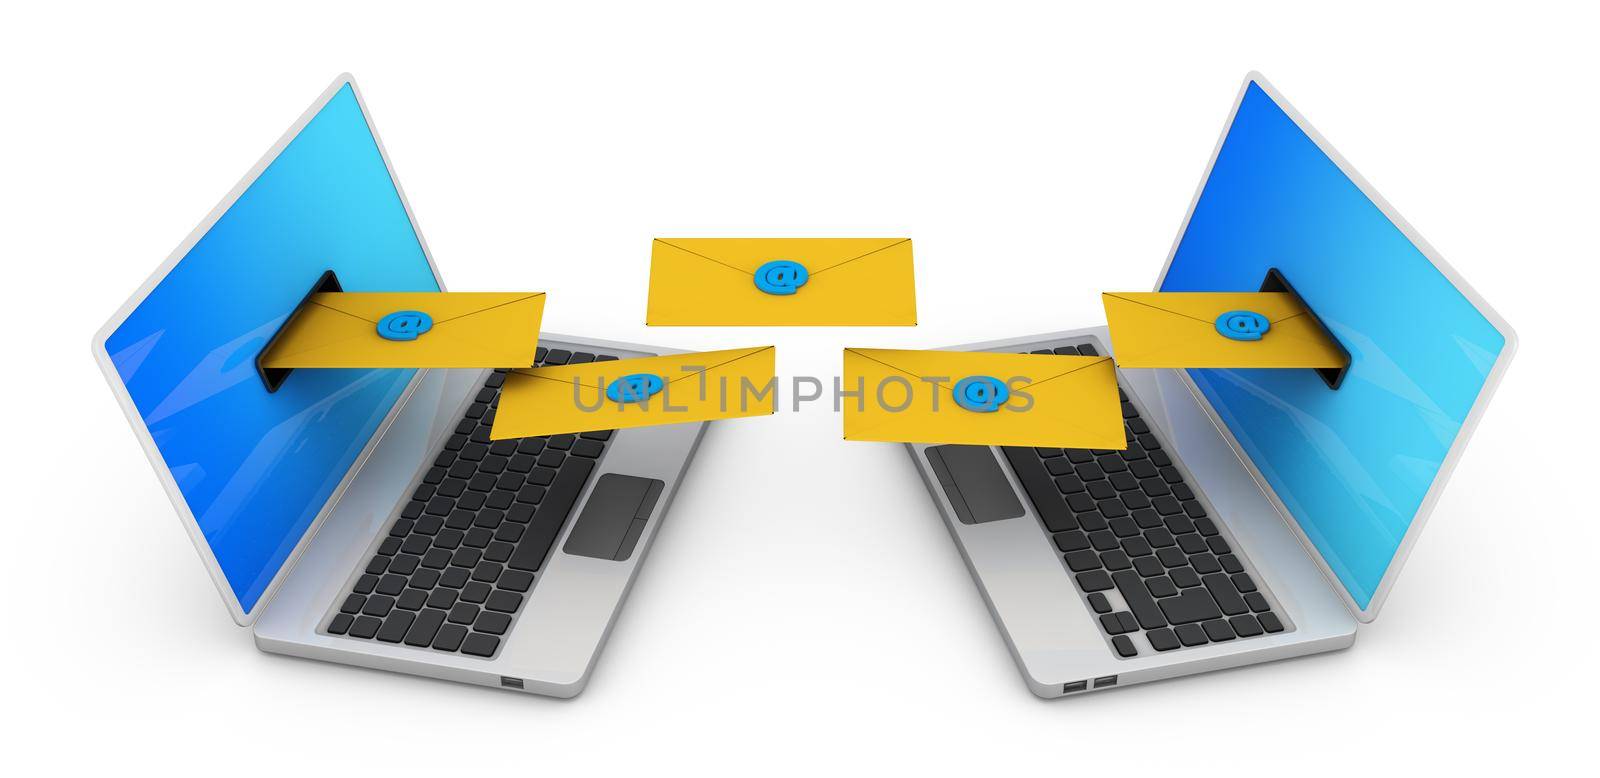 Two laptops with envelopes by rommma